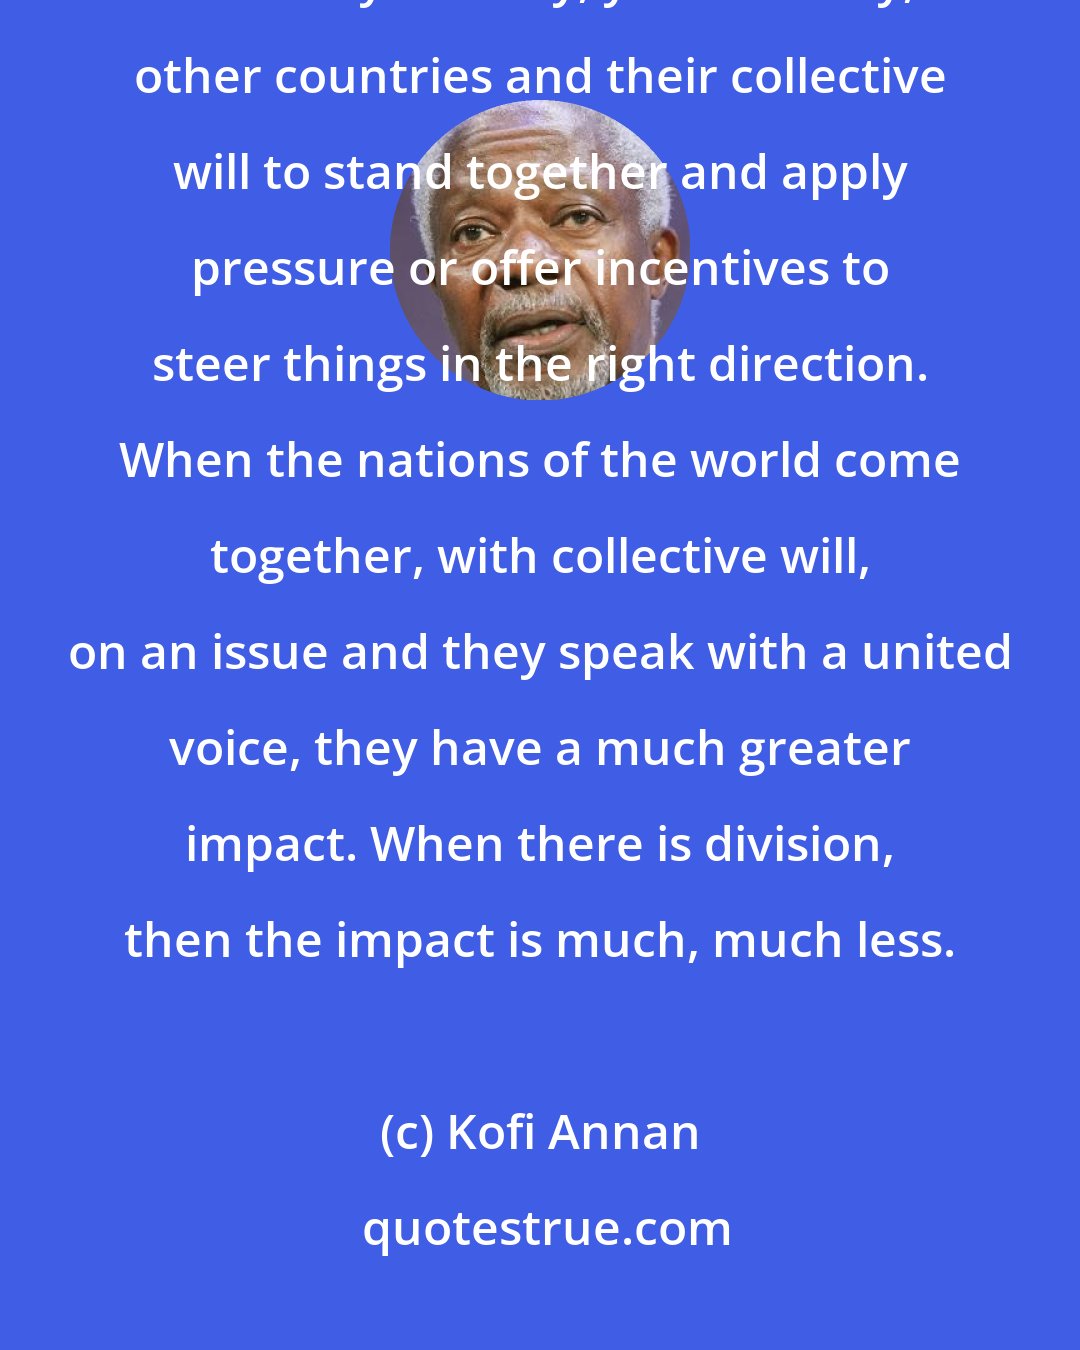 Kofi Annan: When we talk about the UN, what are we really talking about? We are talking about my country, your country, other countries and their collective will to stand together and apply pressure or offer incentives to steer things in the right direction. When the nations of the world come together, with collective will, on an issue and they speak with a united voice, they have a much greater impact. When there is division, then the impact is much, much less.